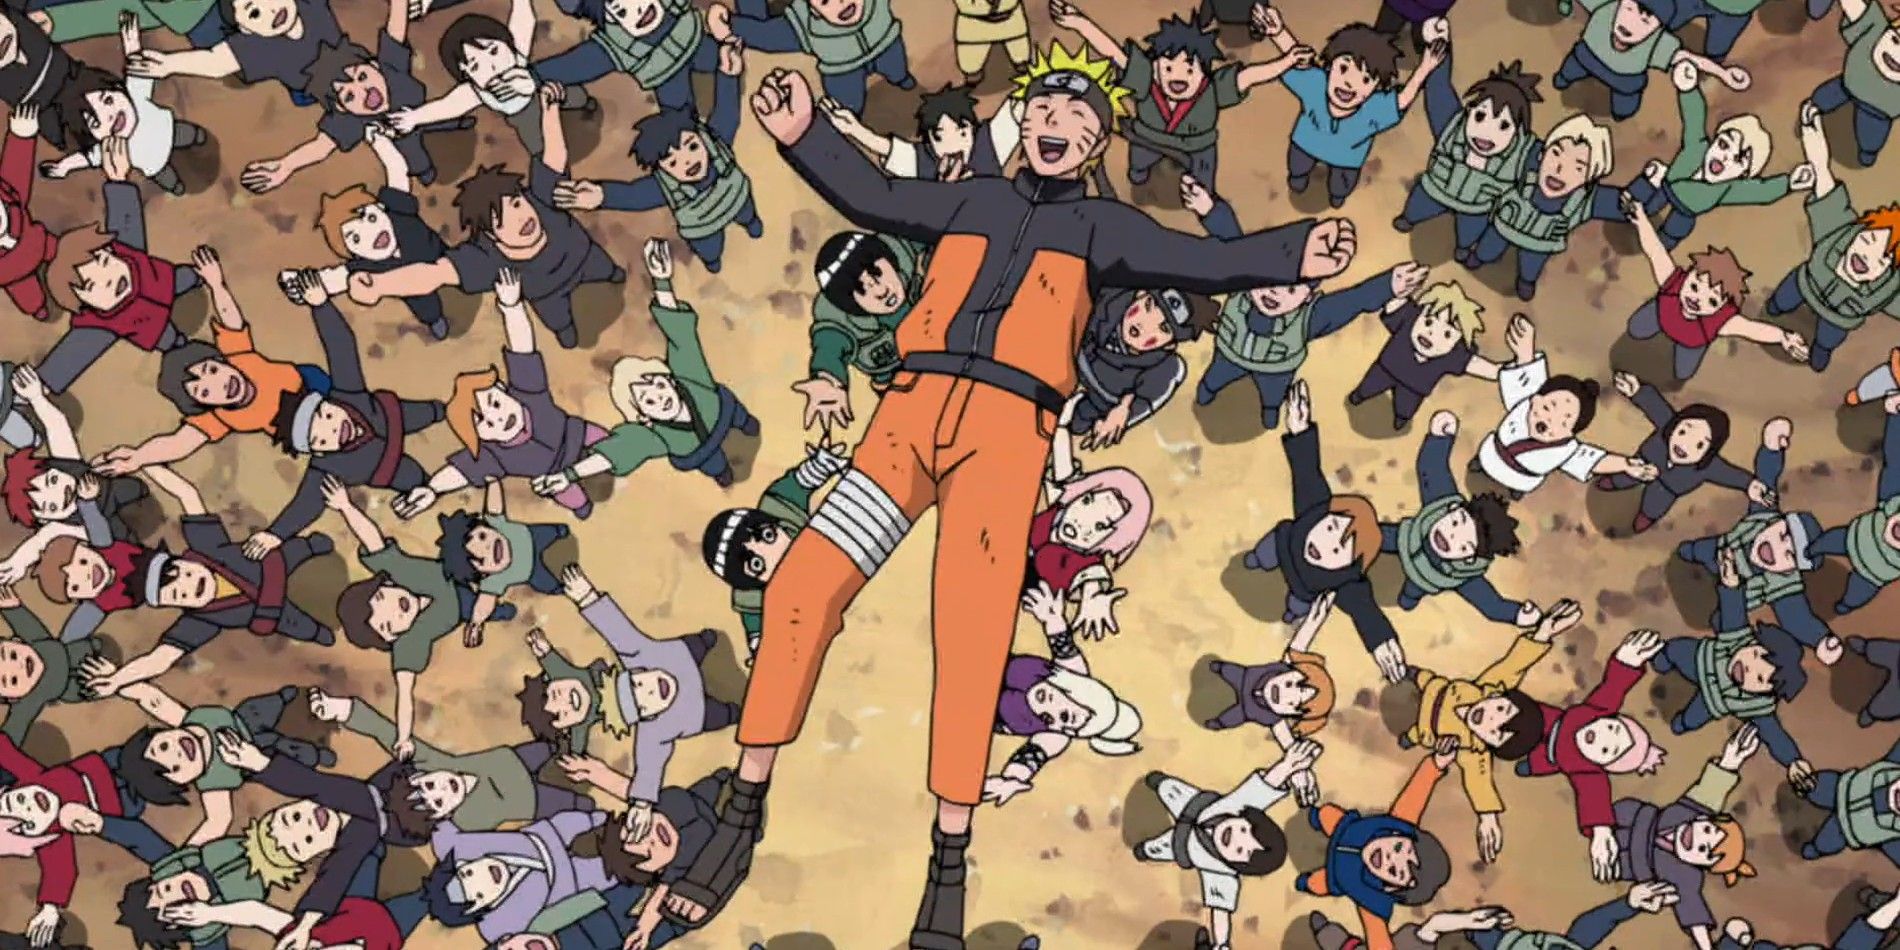 Naruto being lifted by the villagers after defeating pain in Naruto Shippuden